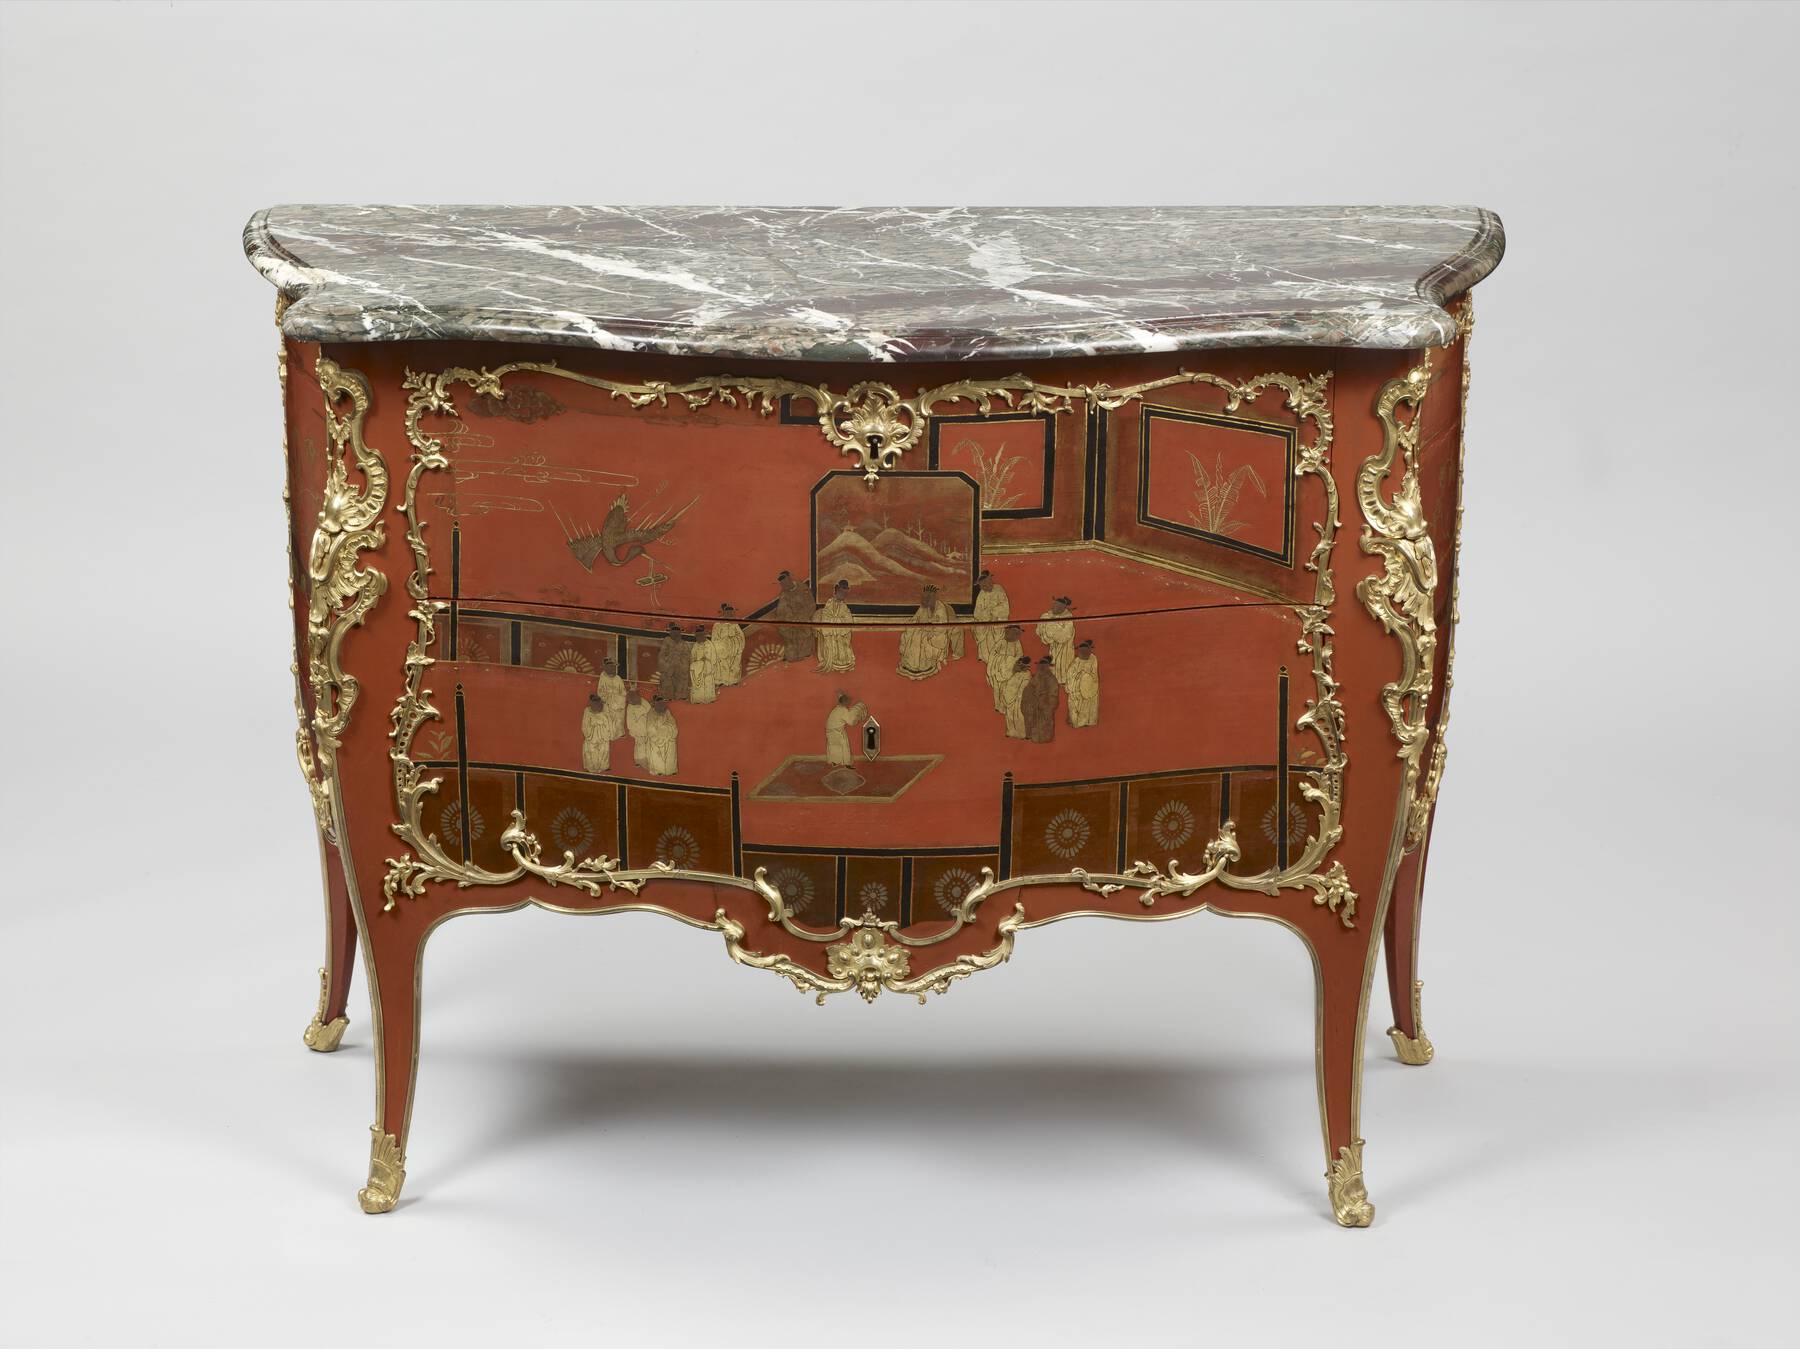 frontal view of an additional red lacquer commode decorated with gilt bronze mounts, black, and gold lacquer designs, and a green, red, and white veined marble top